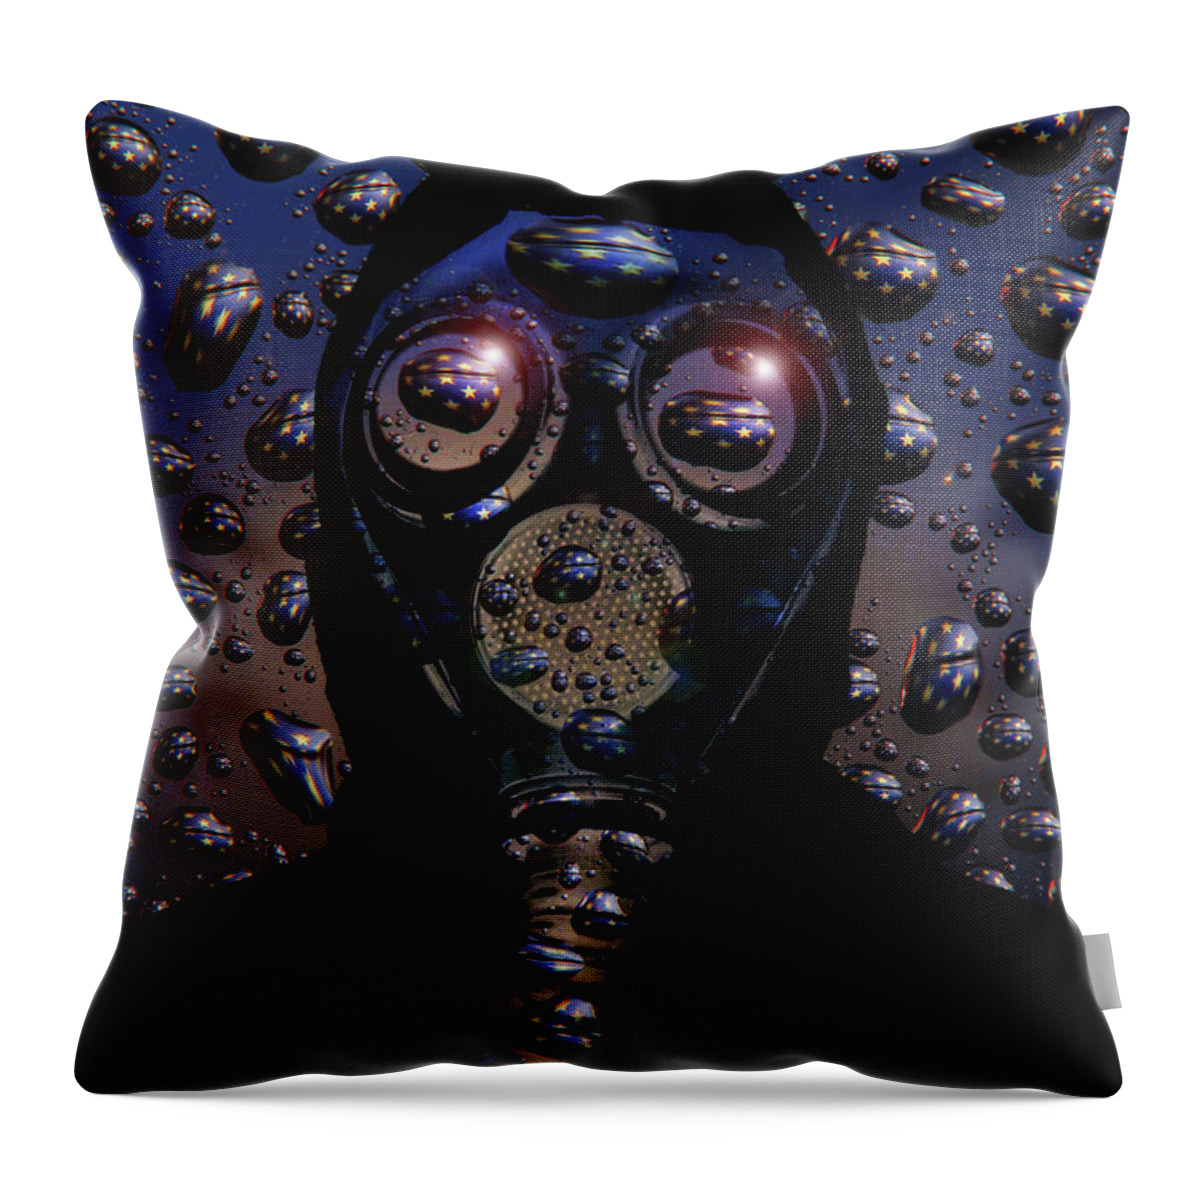 Mask Throw Pillow featuring the digital art Viral America by Jim Painter